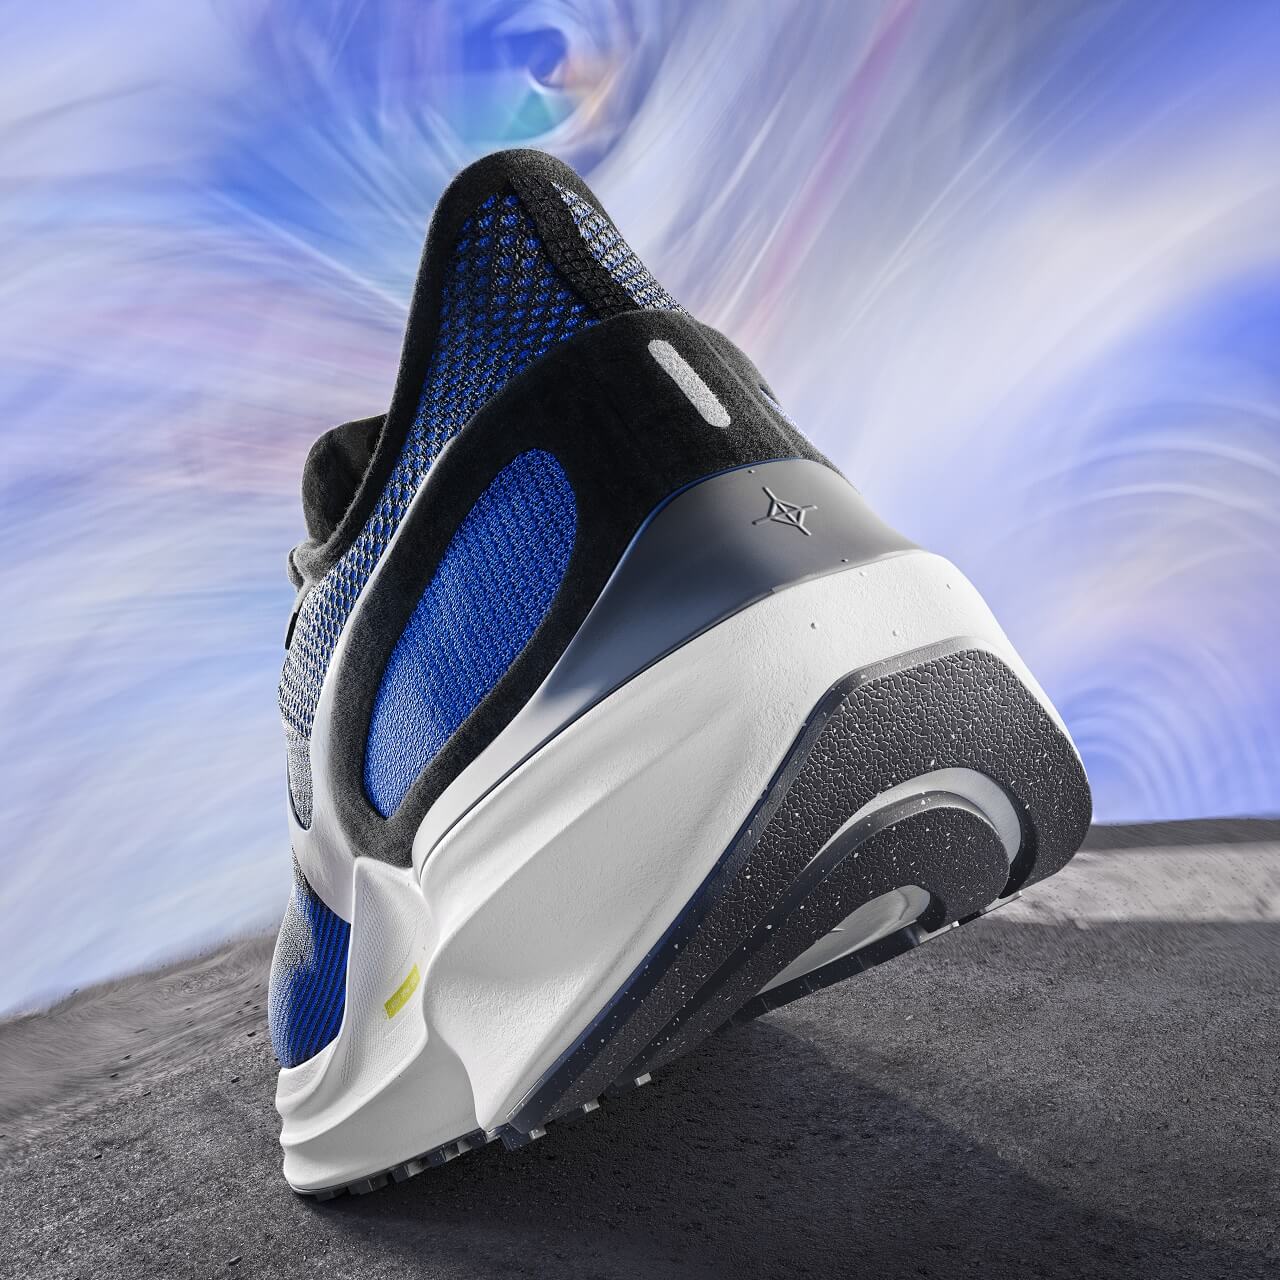 Rear view of running shoe agains blue sky